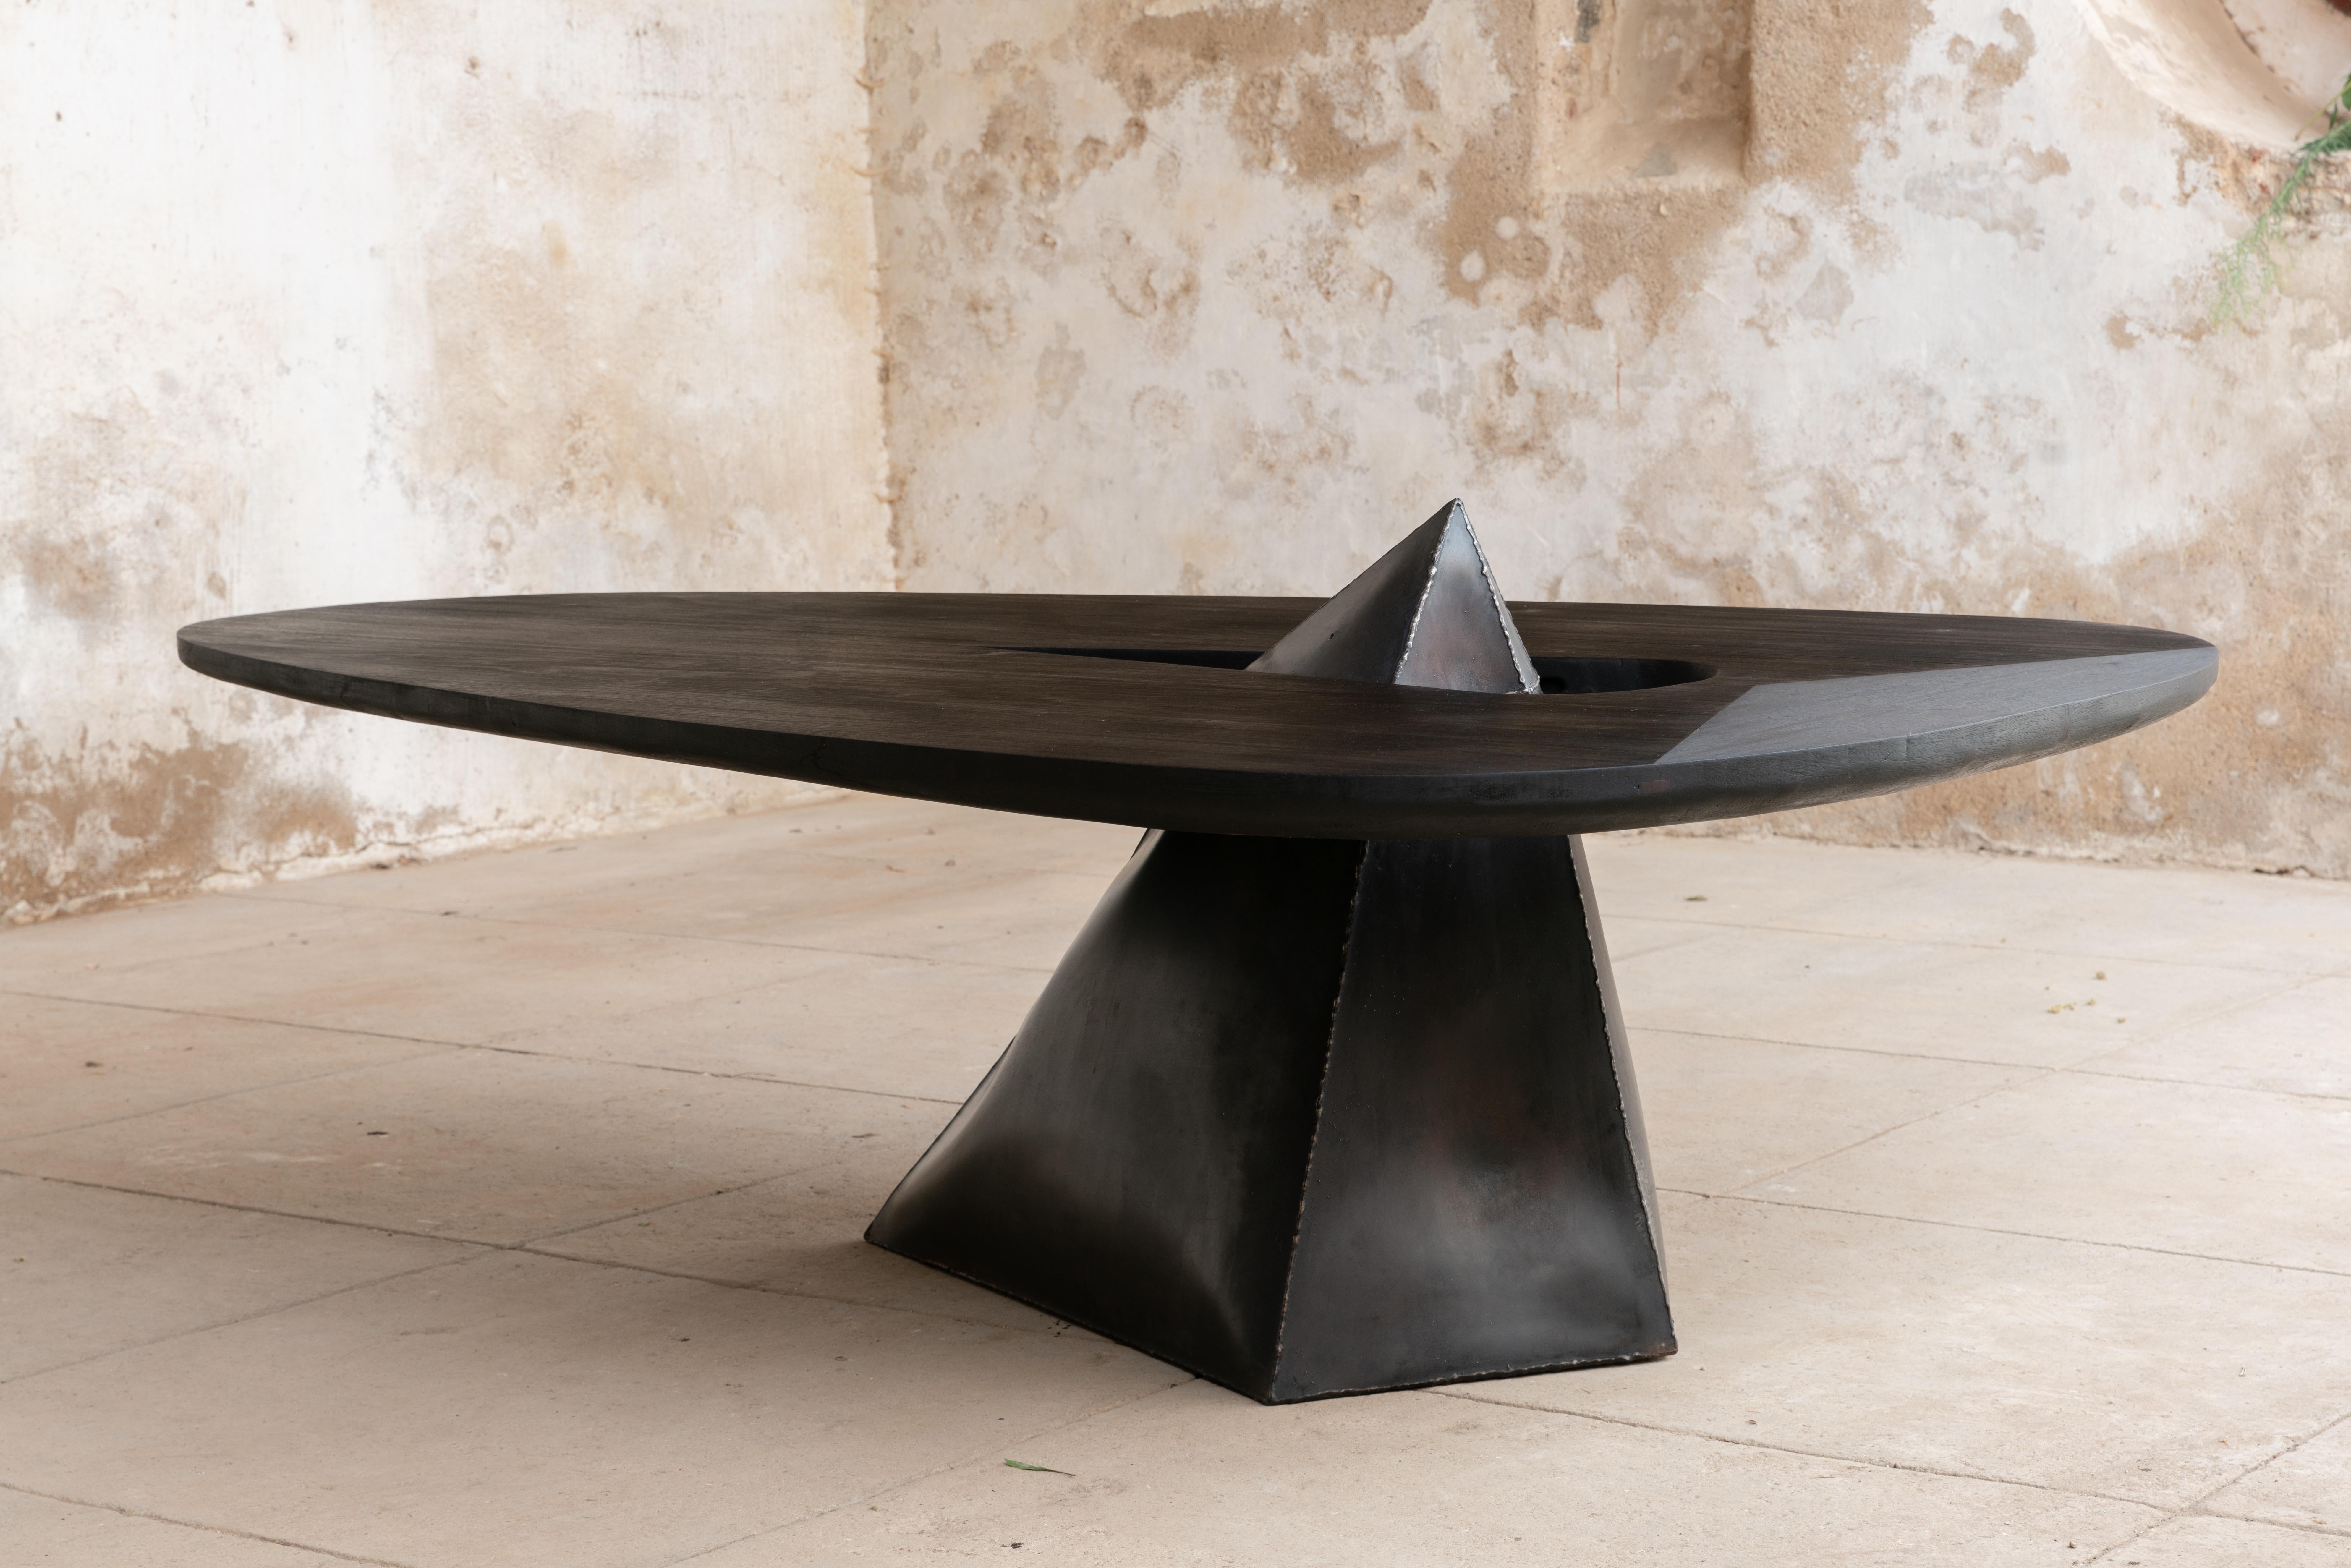 One-of-a-kind dining table.

The object is made from a Metal Volume that has been spontaneously shaped by an explosion, and hand treated to reach a soft touch. Part of a series of three furniture pieces, Metal Volumes have been exploded at various